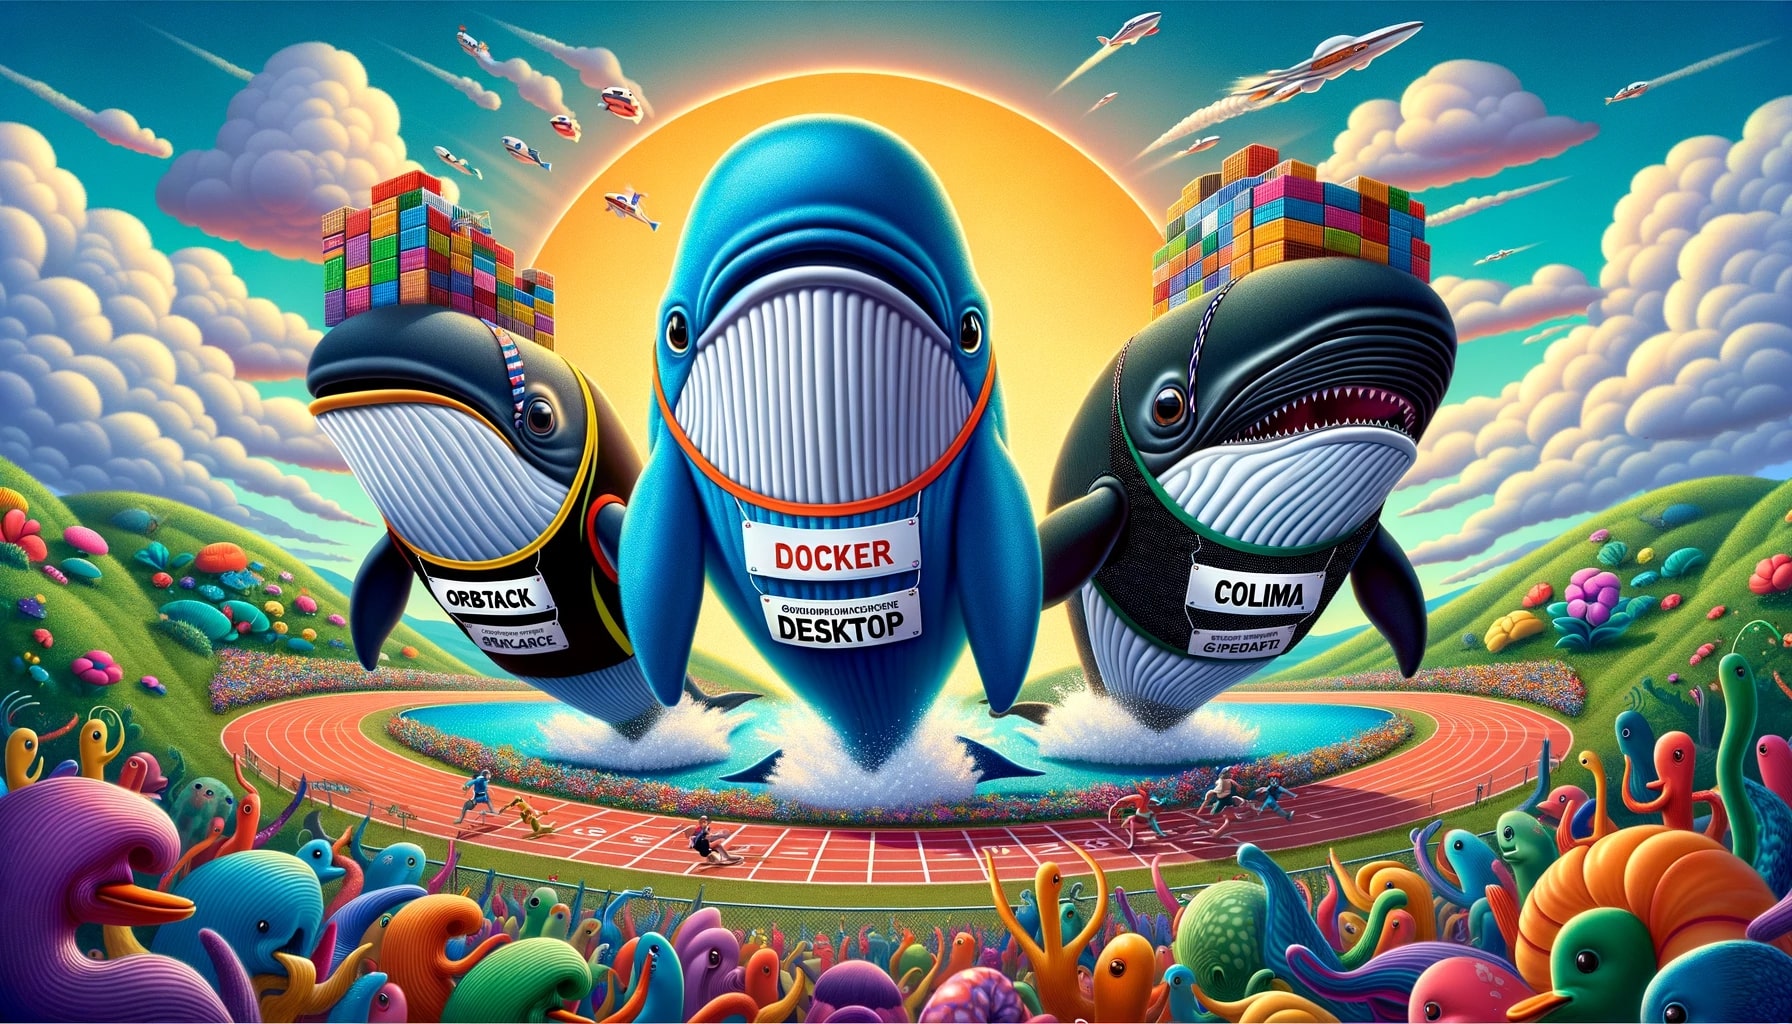 Cartoon race with three whales competing in a running race